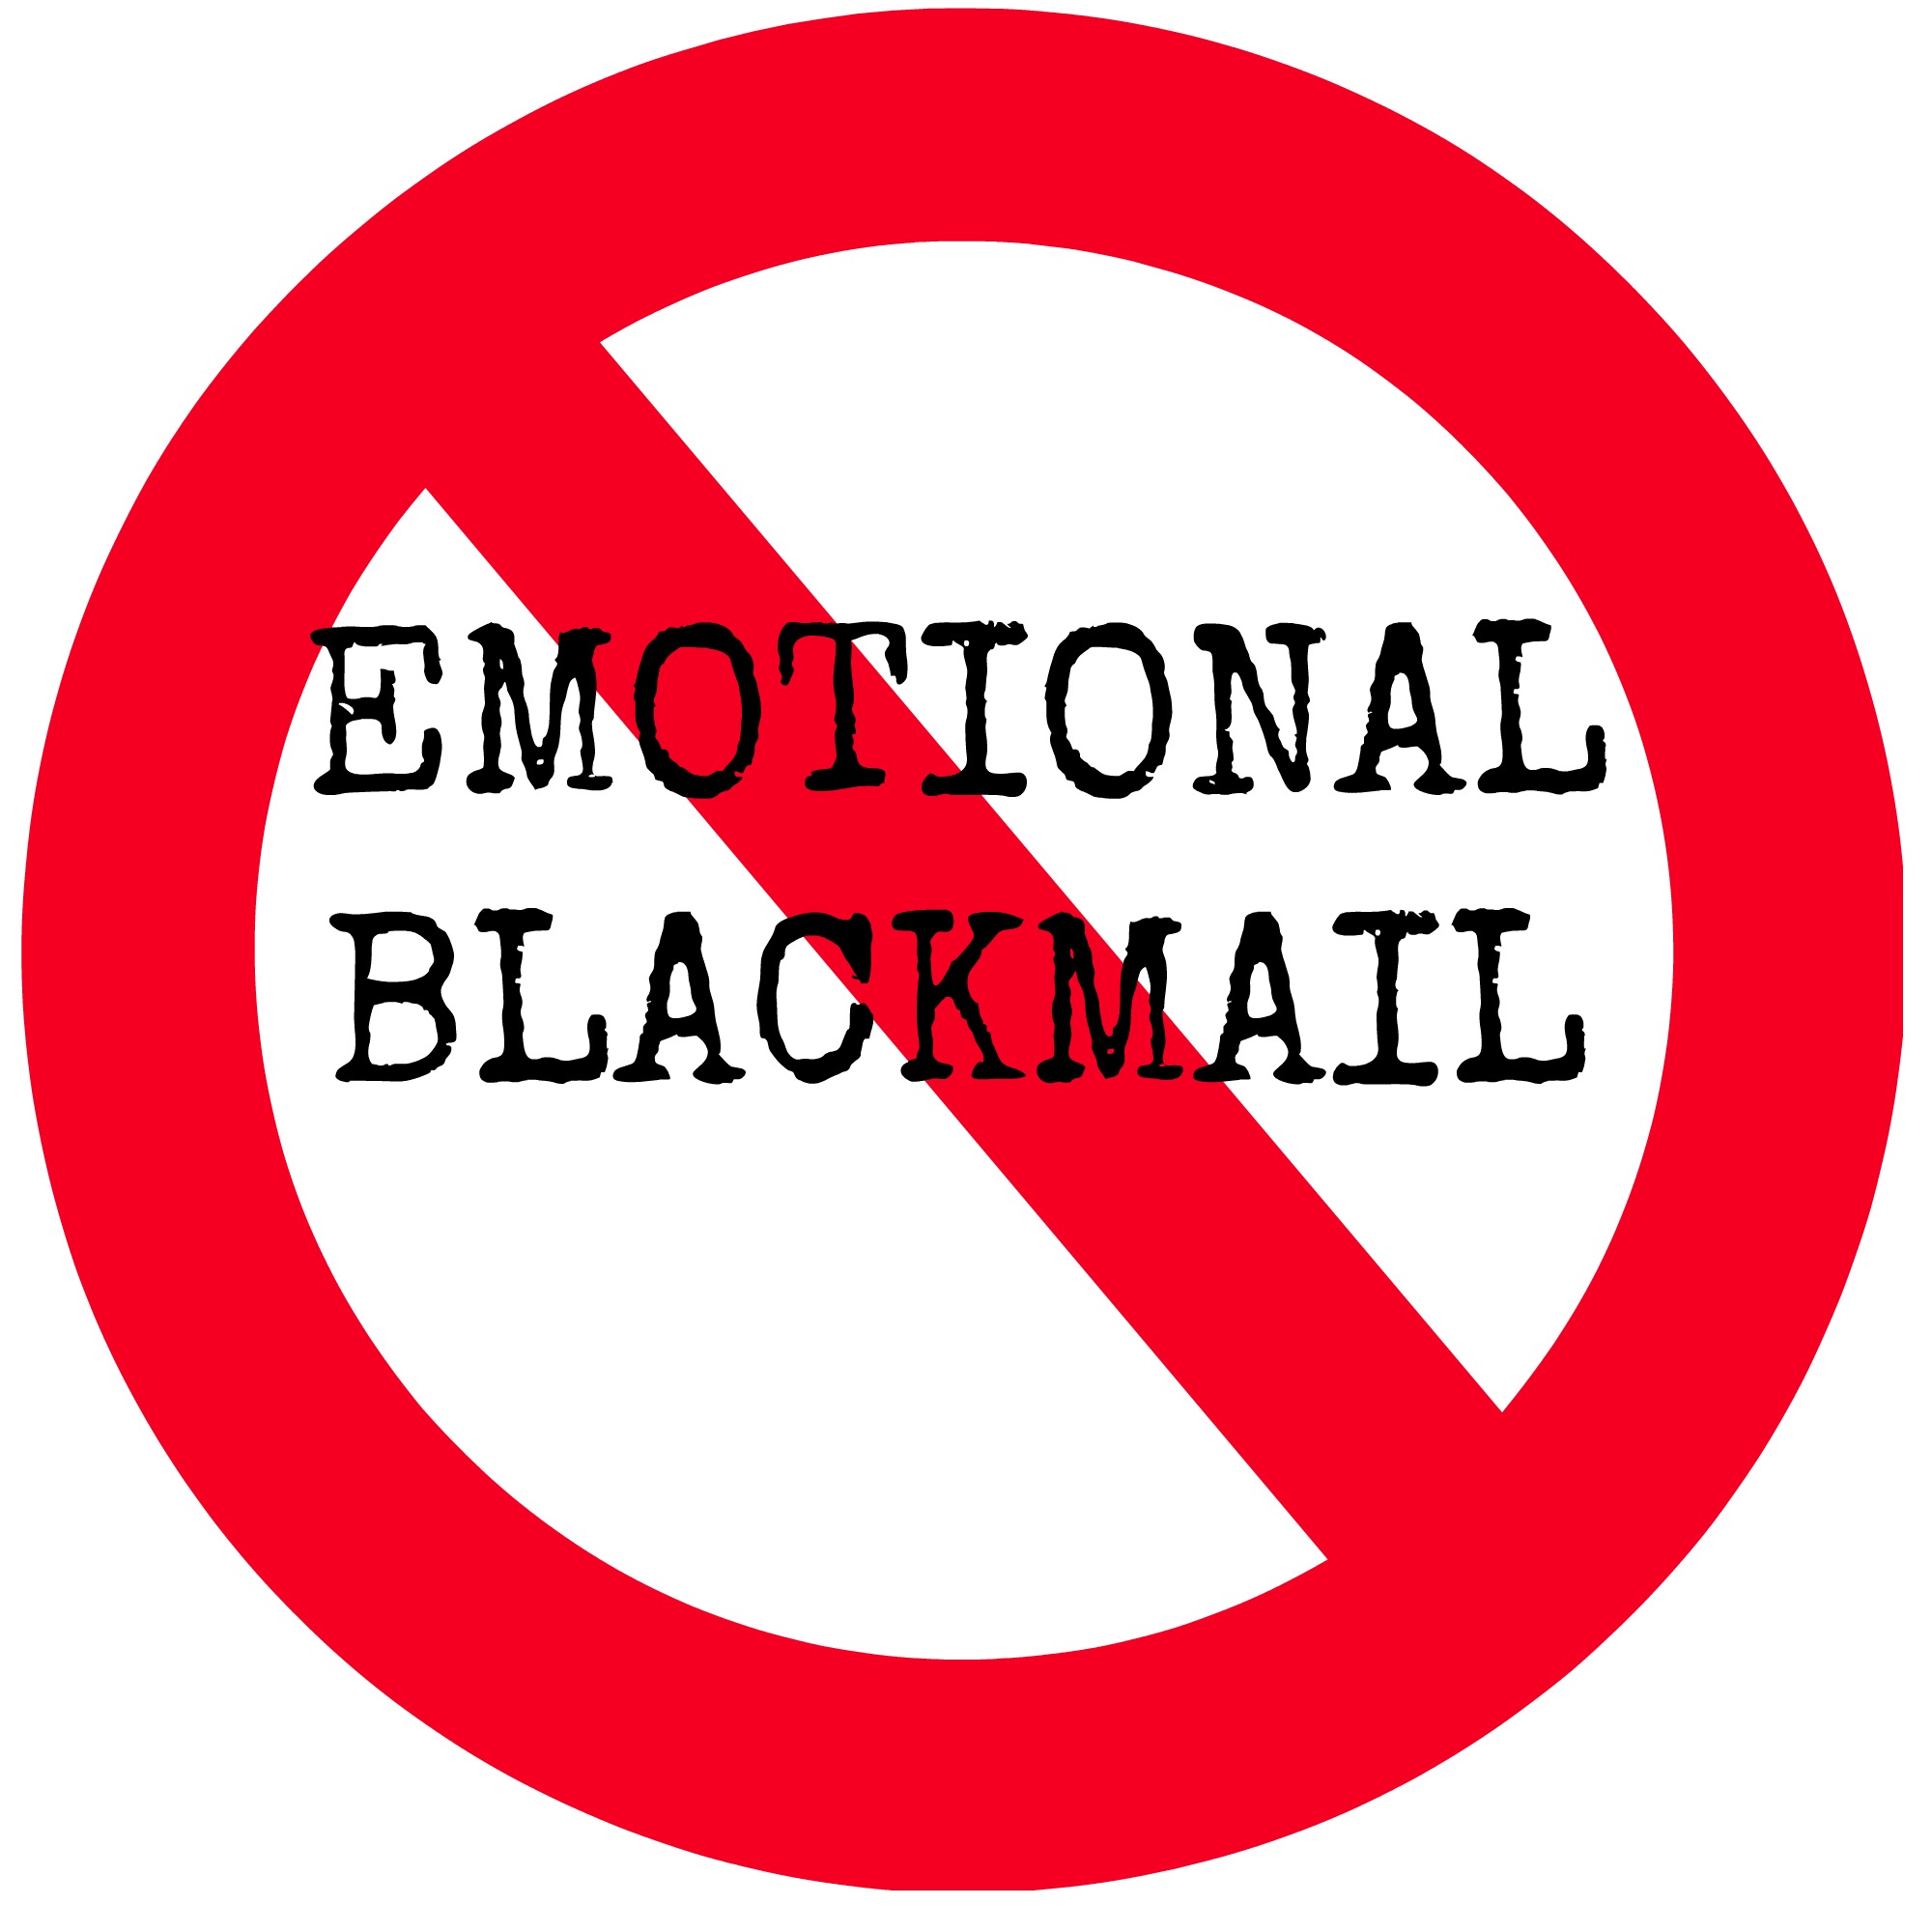 Are You the Target Of Emotional Blackmail?